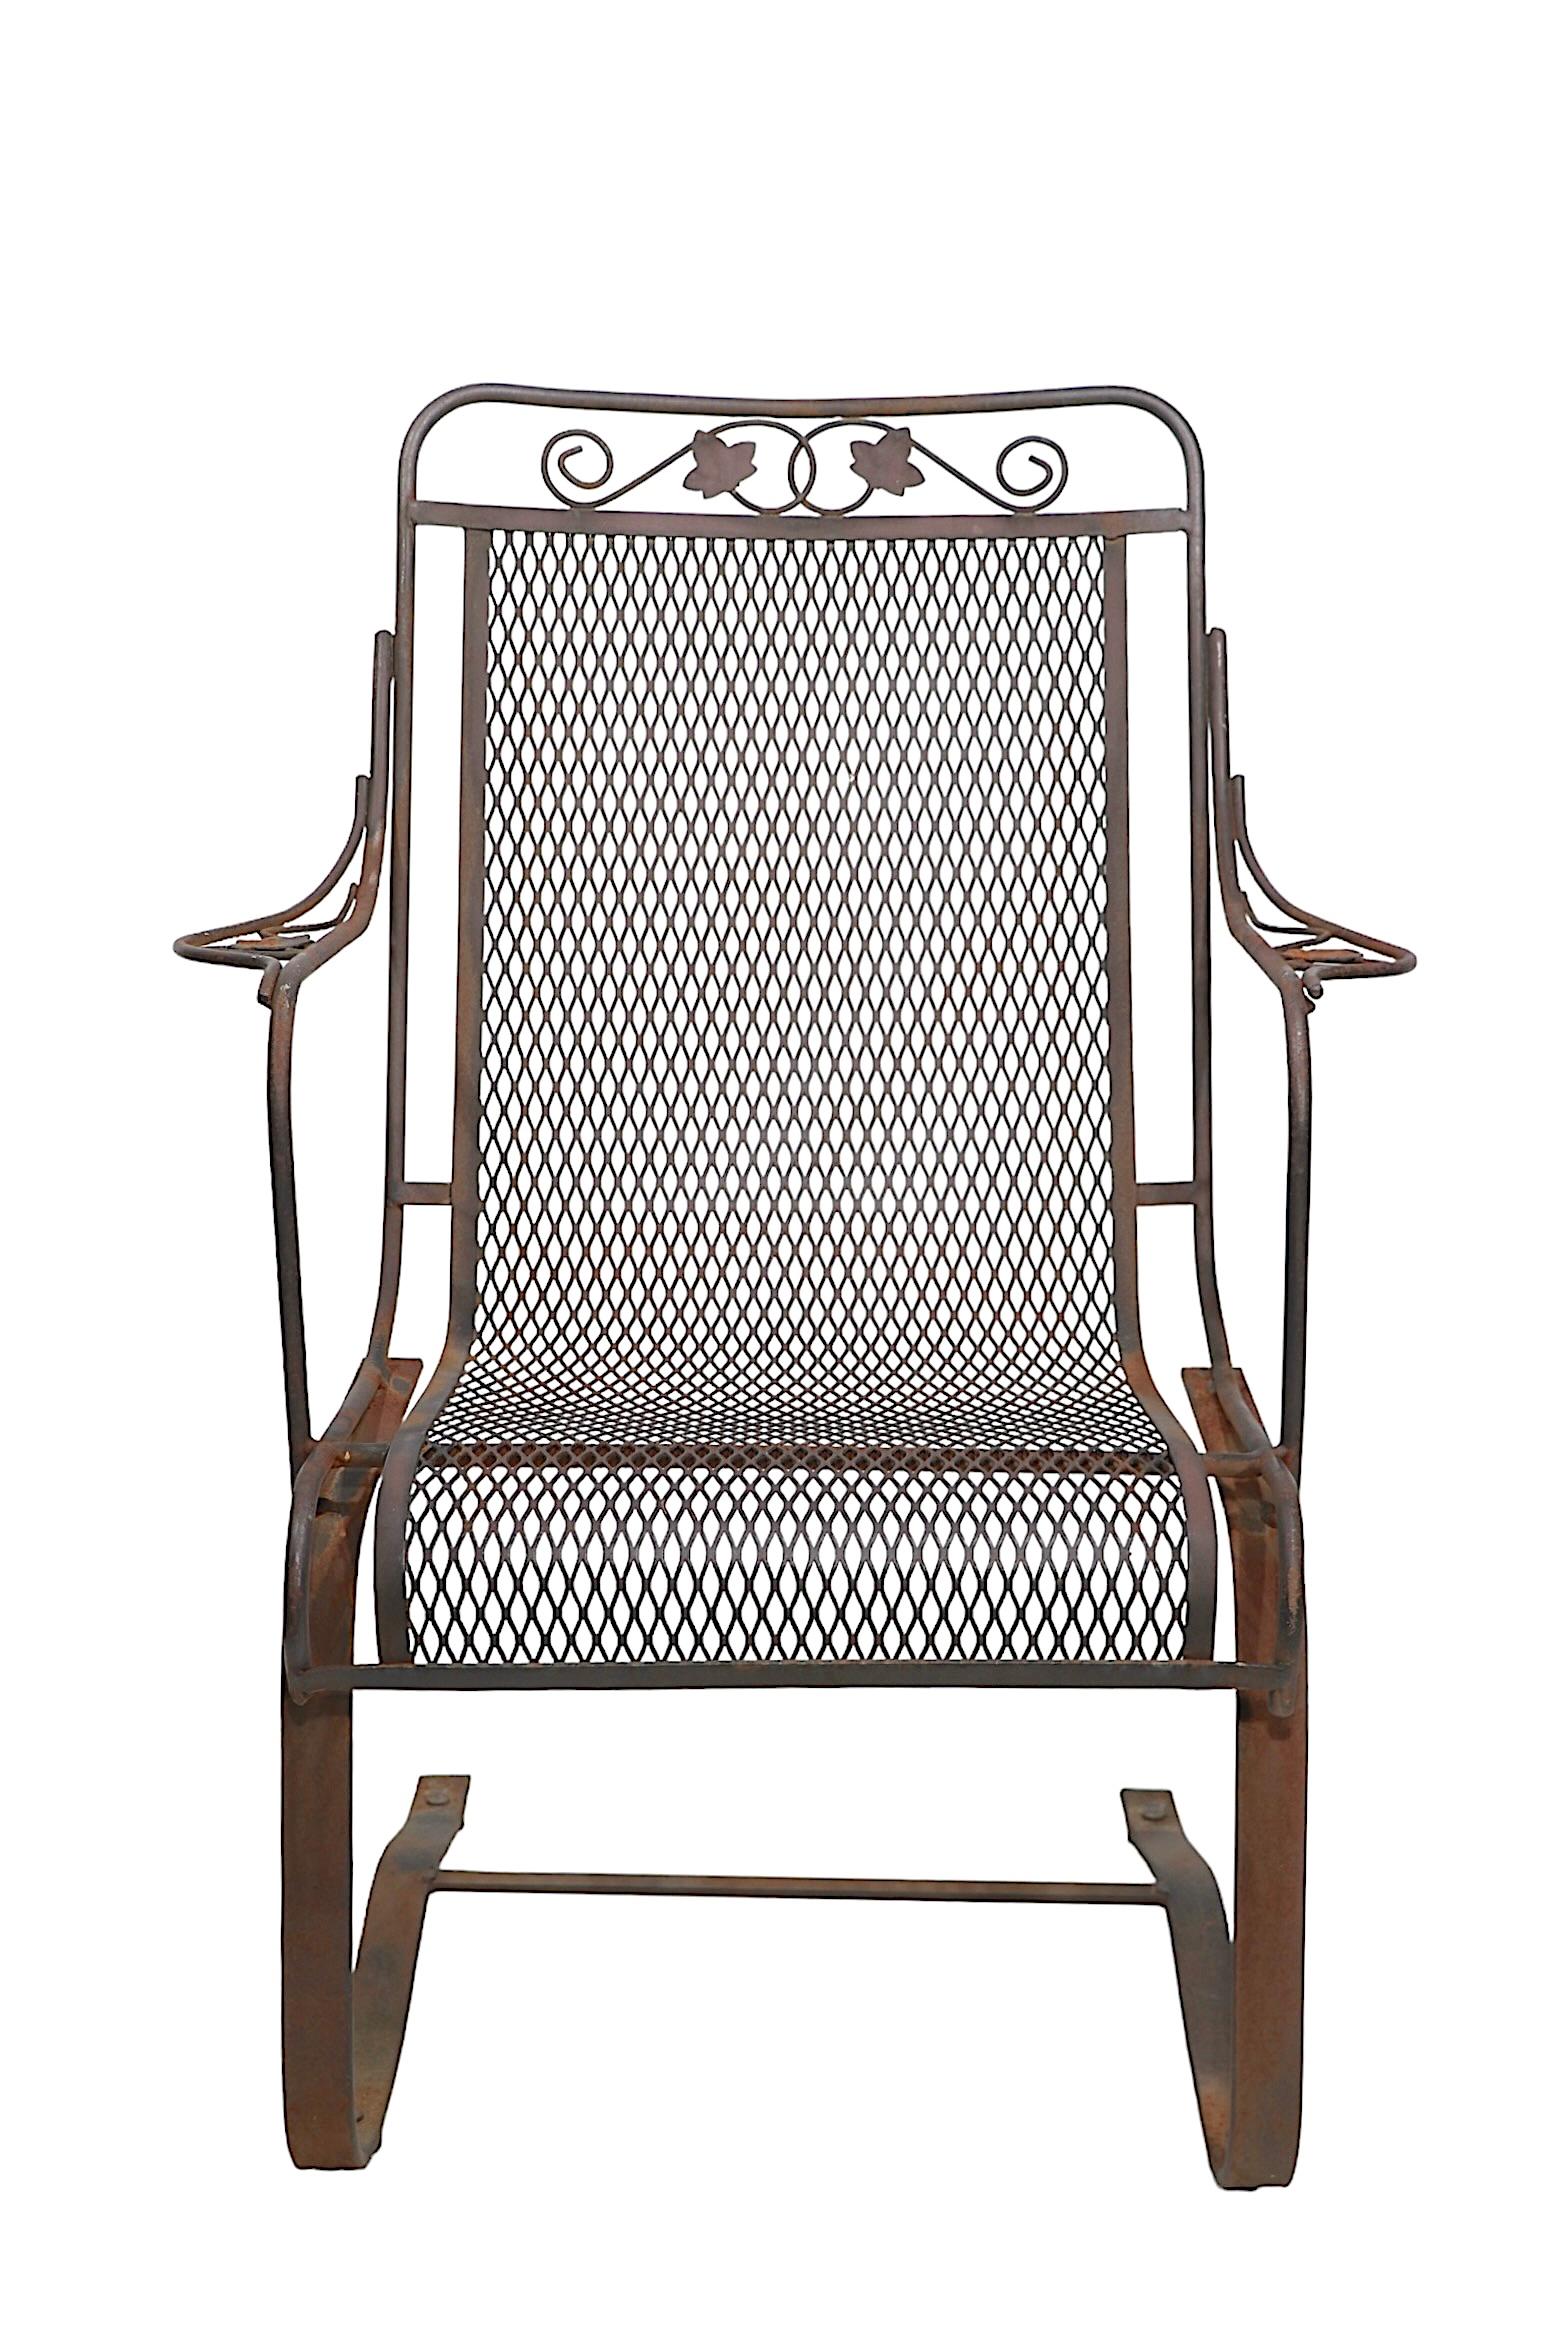 20th Century Wrought Iron Cantilevered High Back Lounge Garden Patio Poolside Chair 